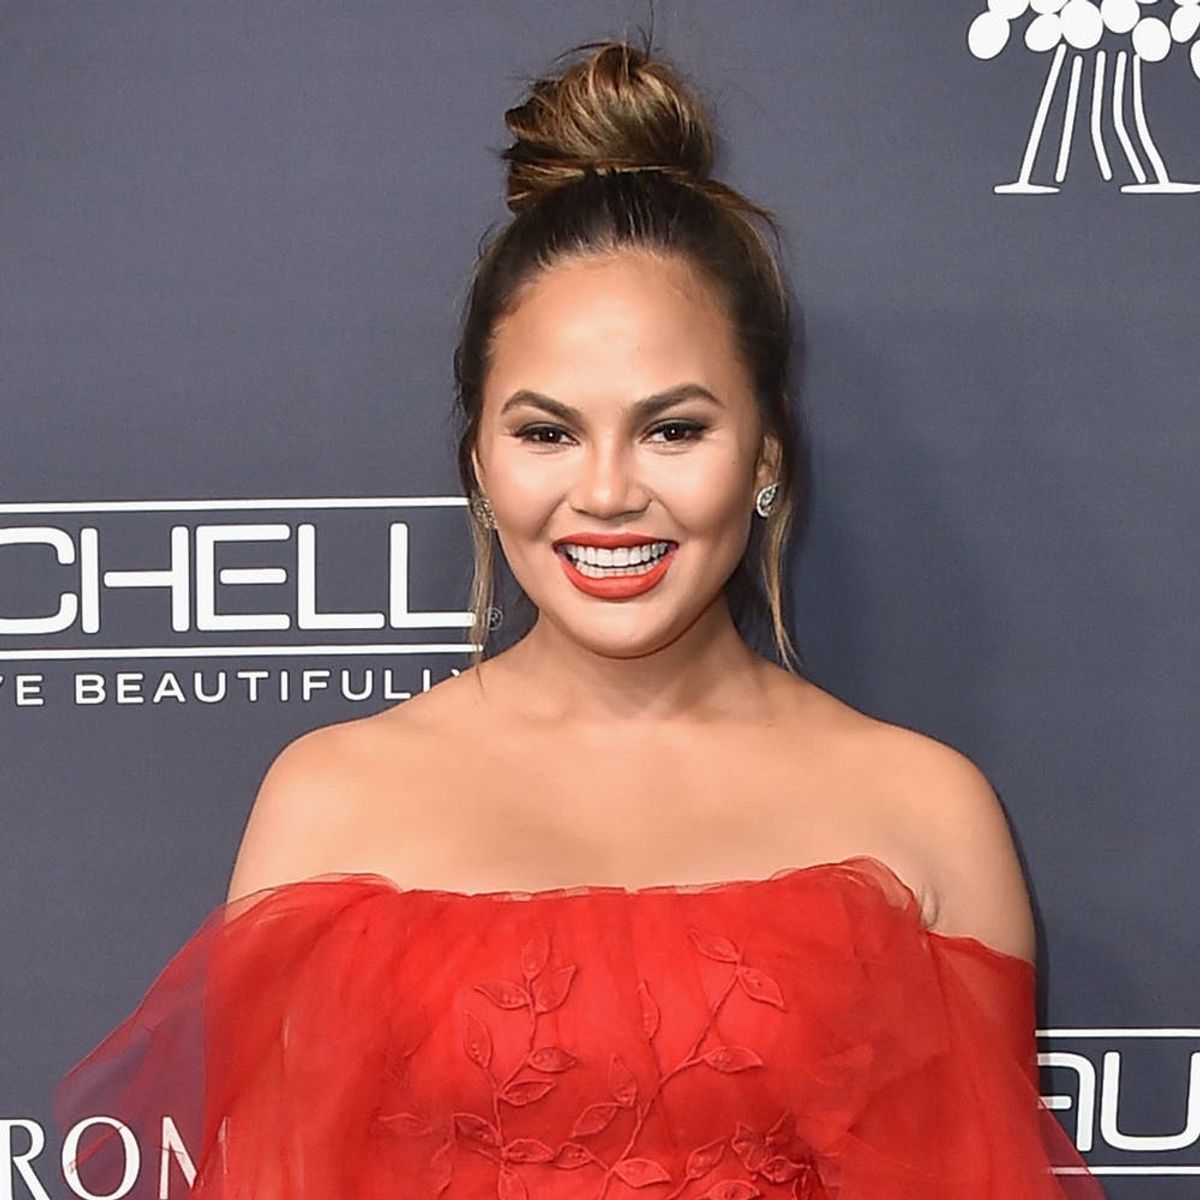 Chrissy Teigen Snaps Her First Baby Bump Selfie After Announcing She’s Pregnant